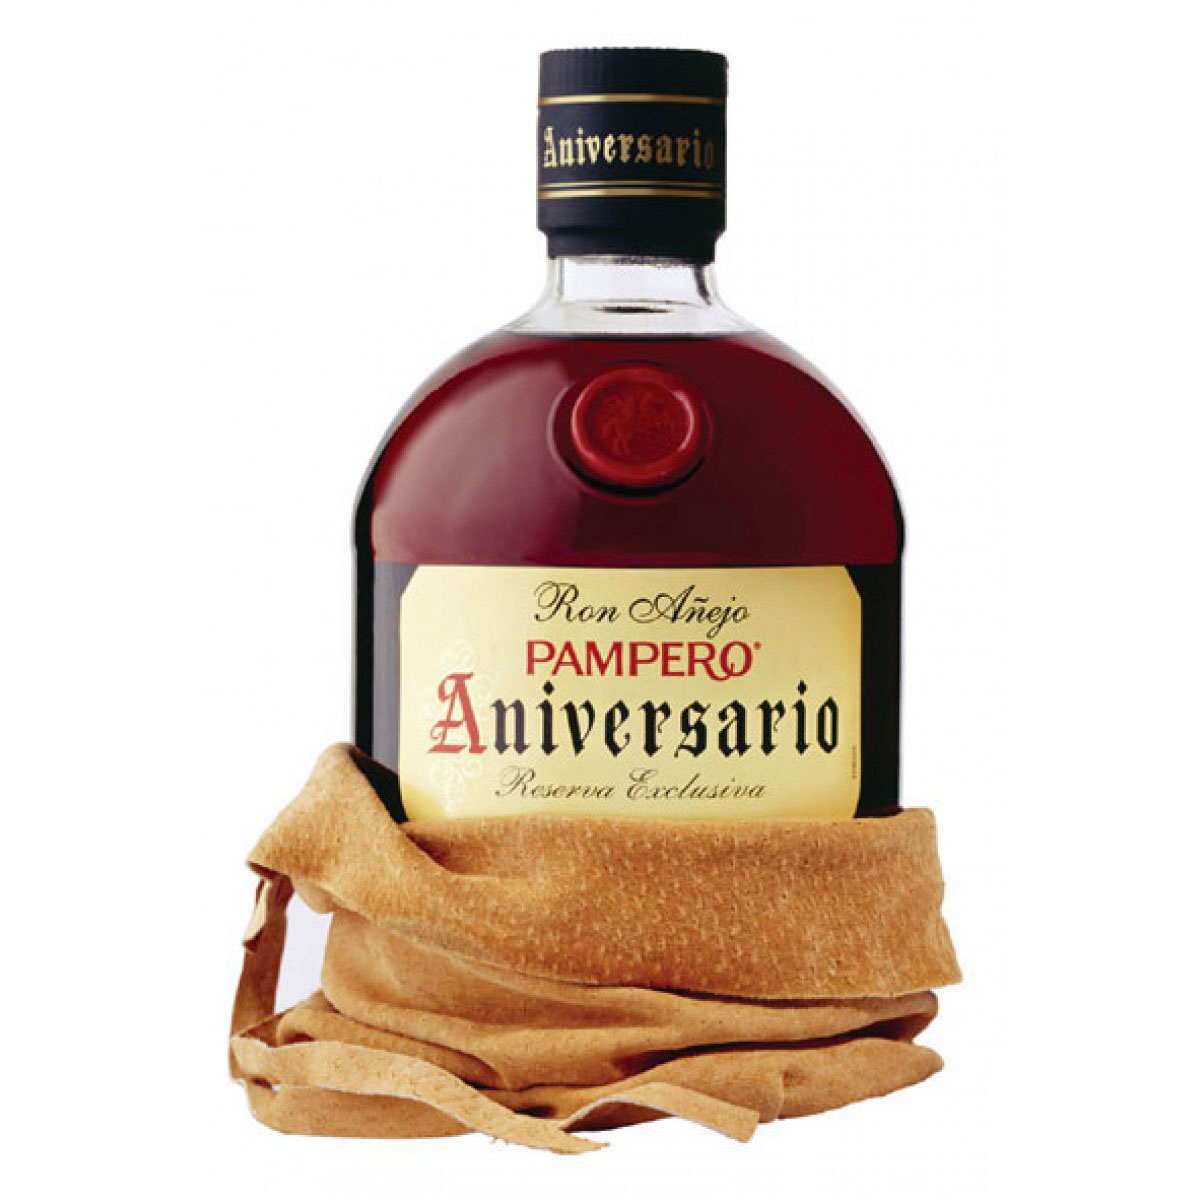 a bottle of pampero aniversario